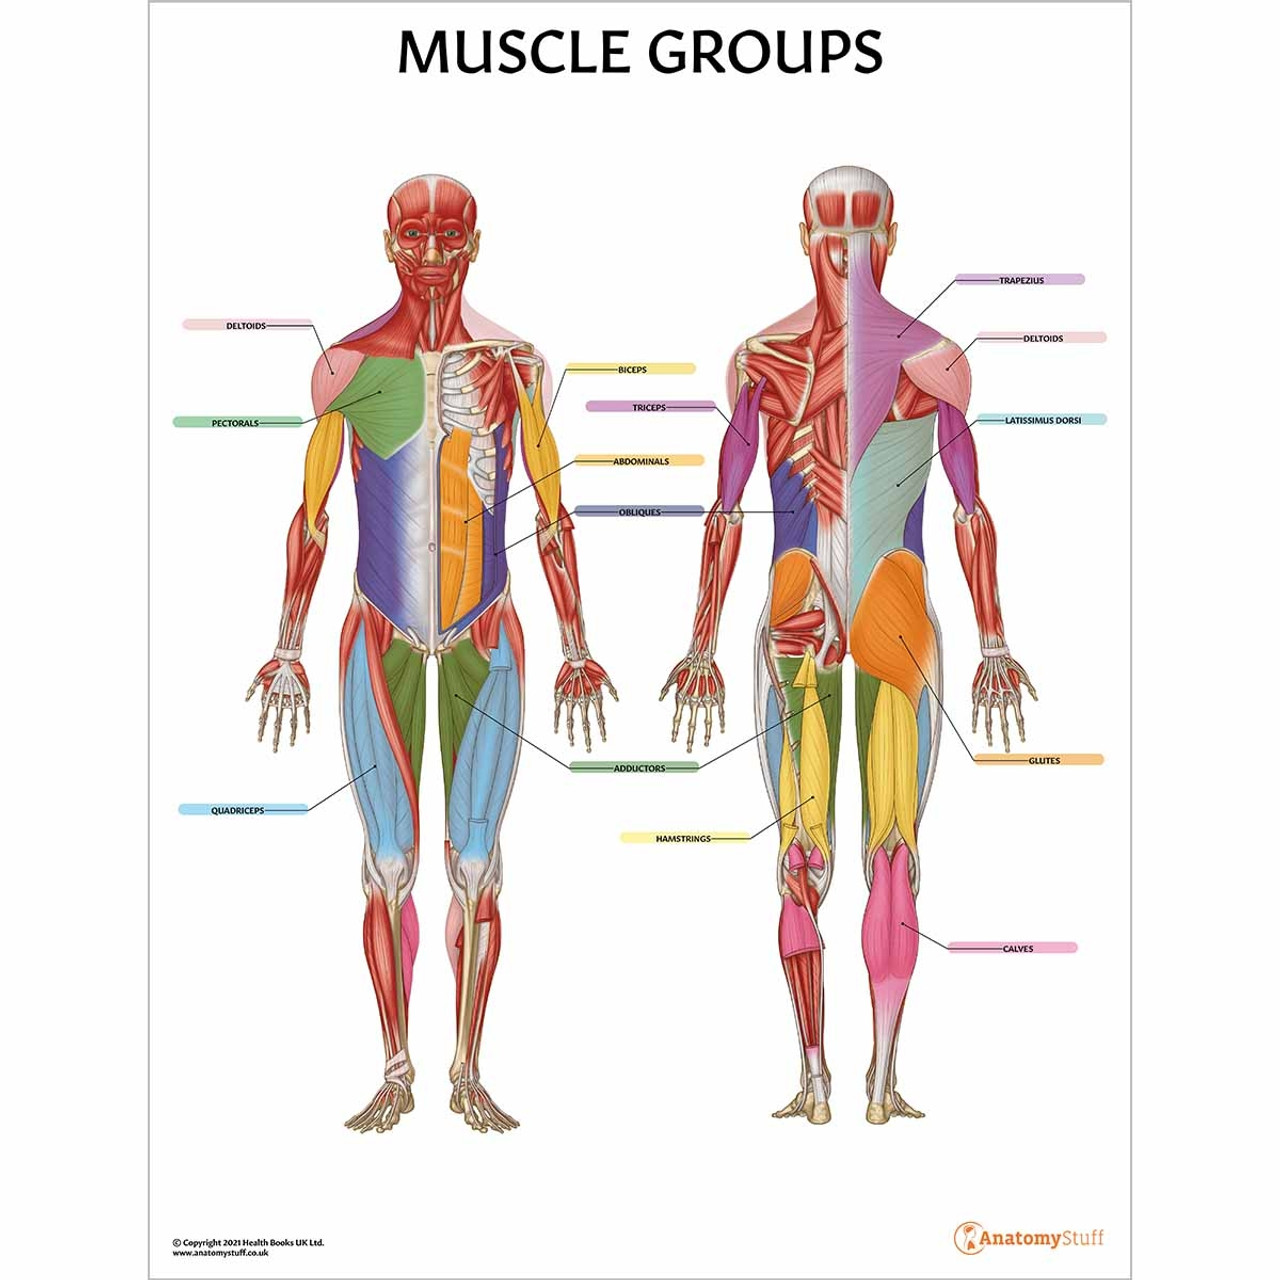 Muscle Groups Poster Chart 1  46783.1637944476 ?c=1